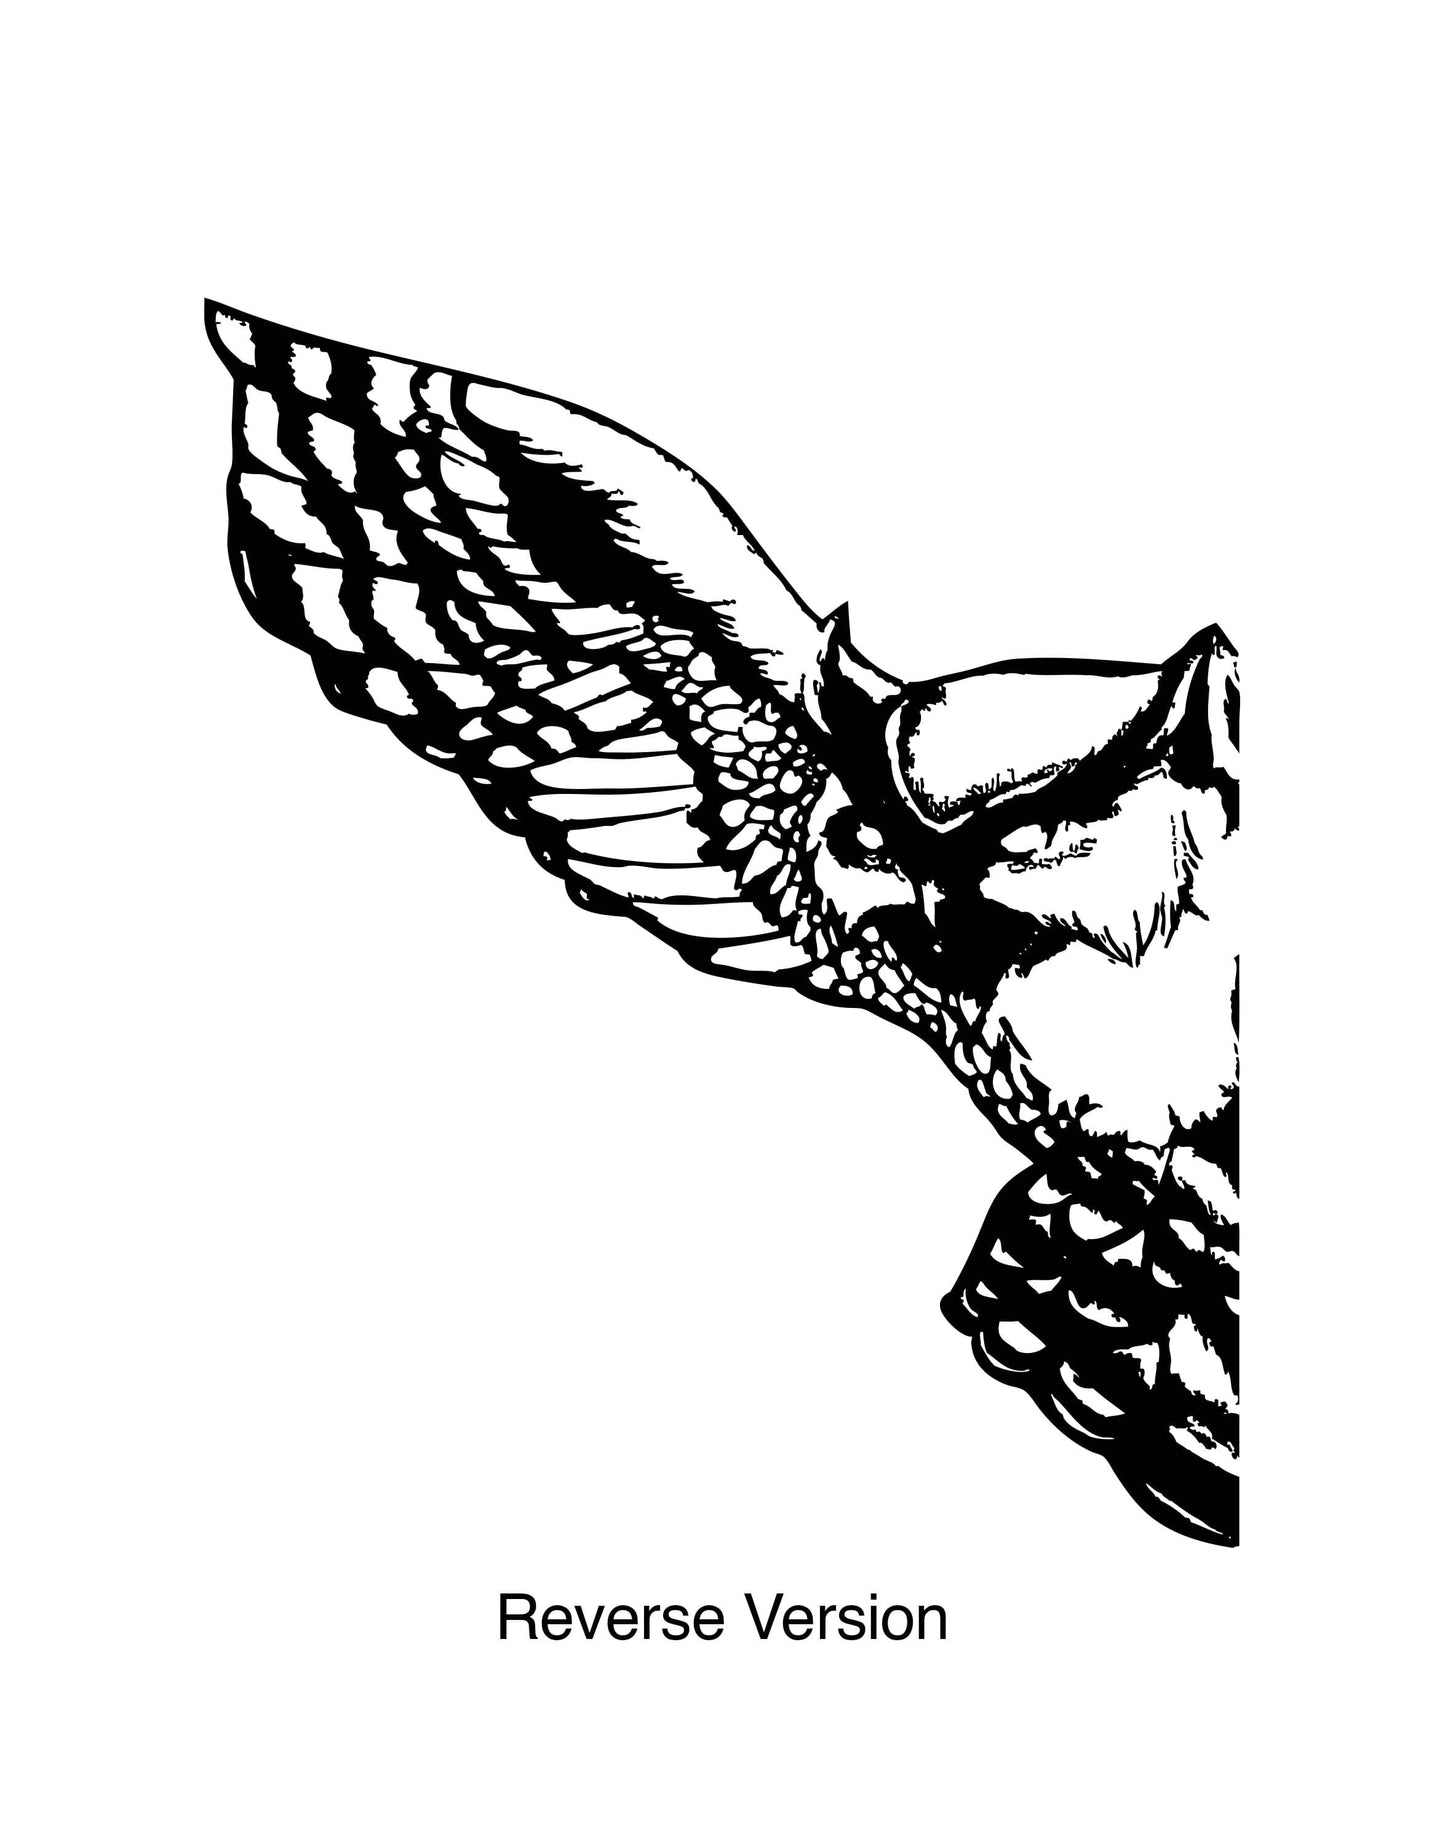 Owl Wing Flying Out of Wall Sticker.  #5481